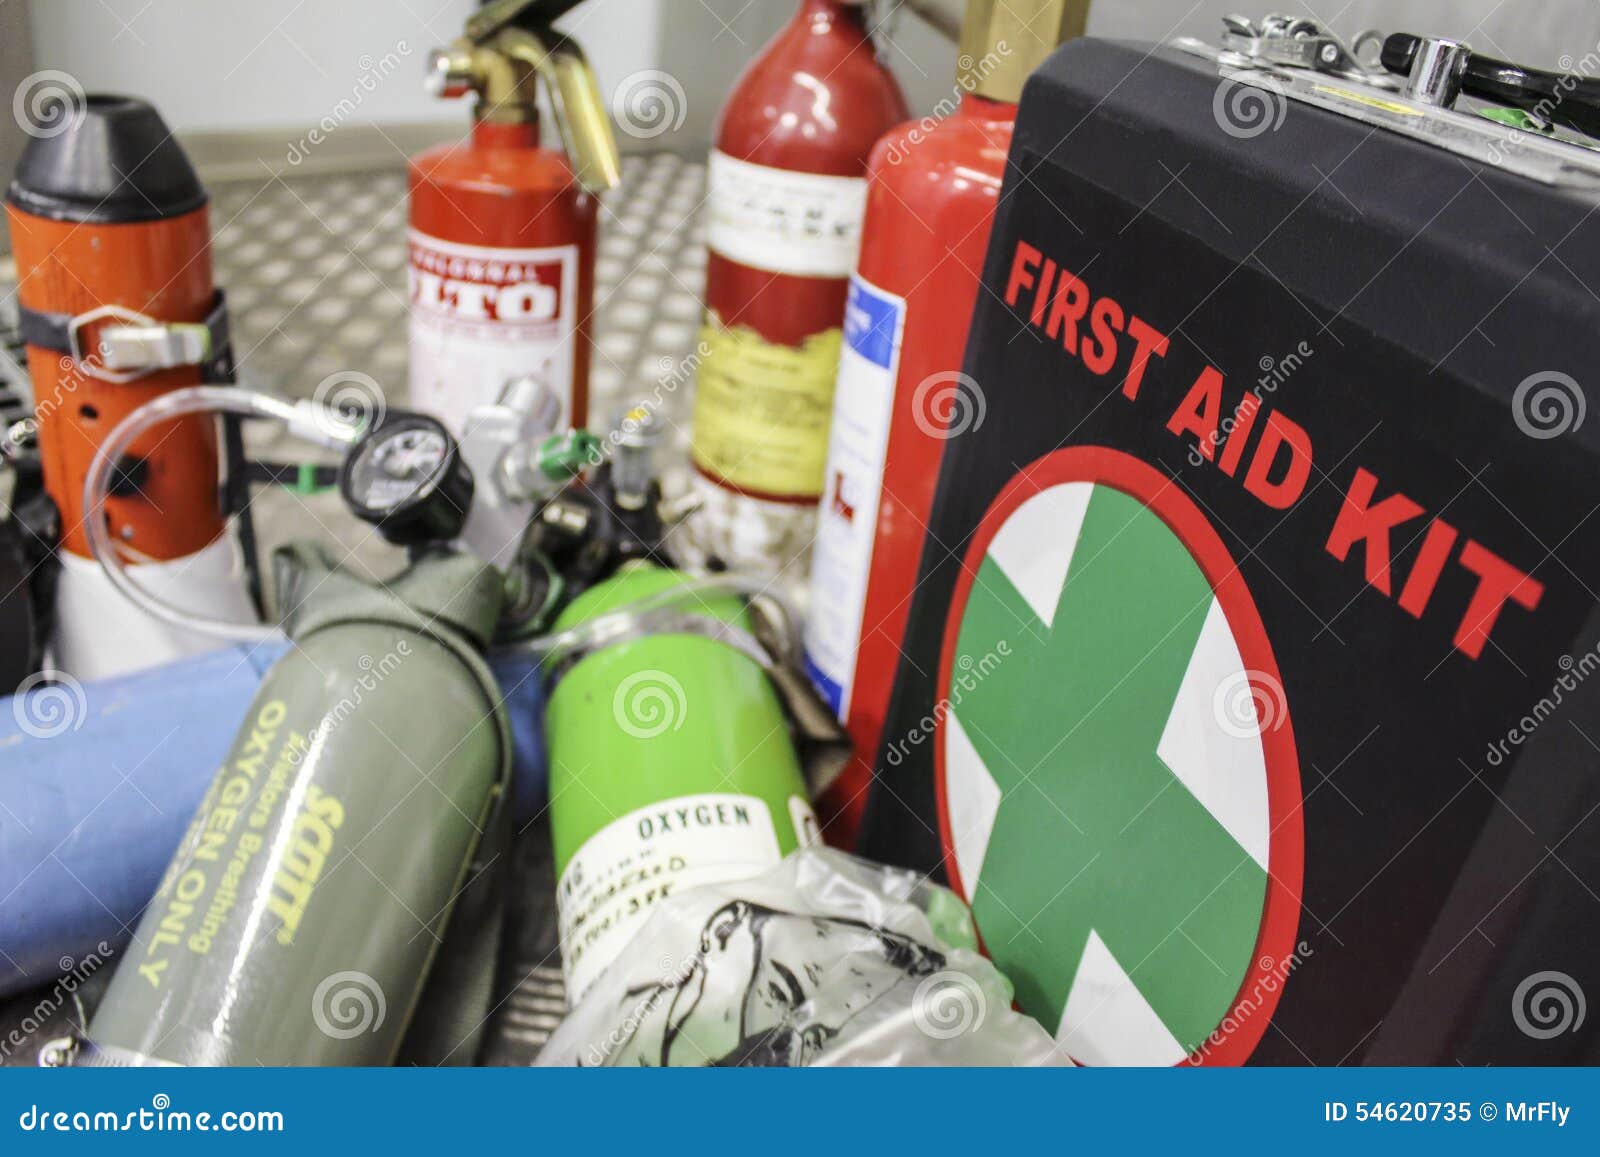 Can you take a first aid kit on a plane Airplane First Aid Kit Editorial Image Image Of Oxygen 54620735